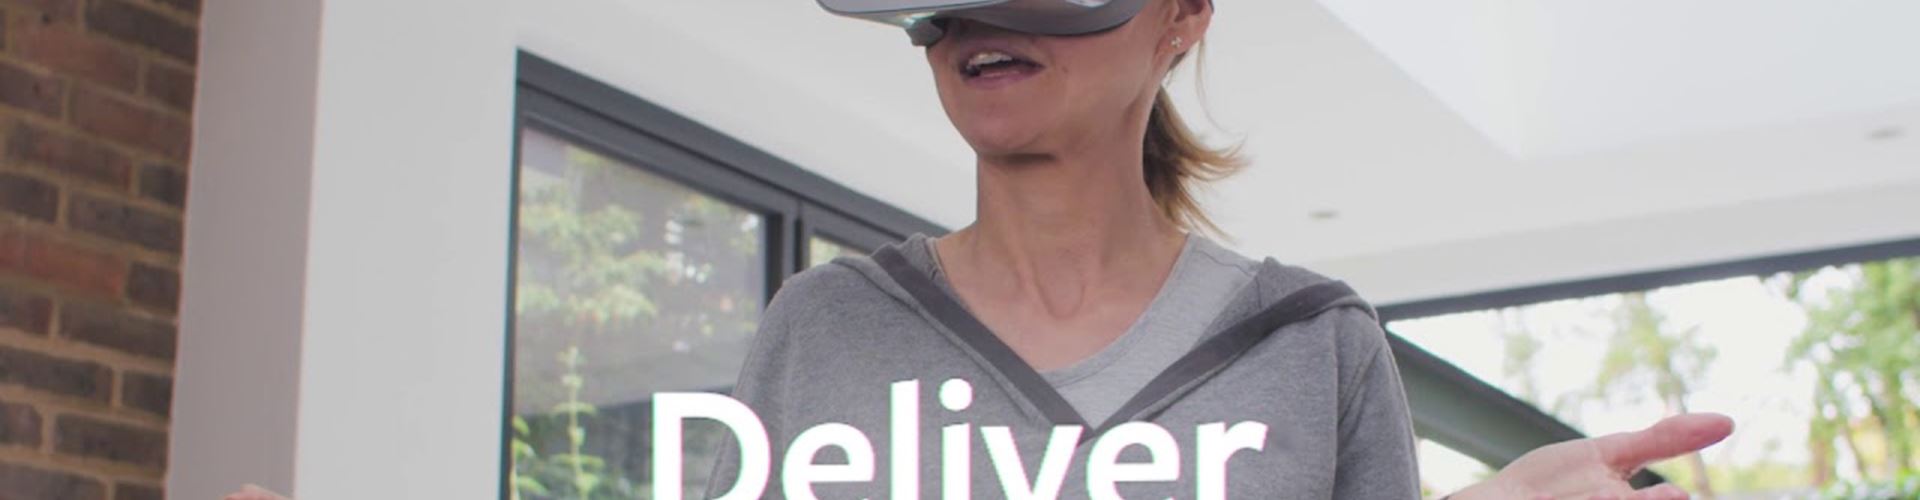 Distance learning re-imagined with new Virtual Reality vision for London School of Business and Finance online students 